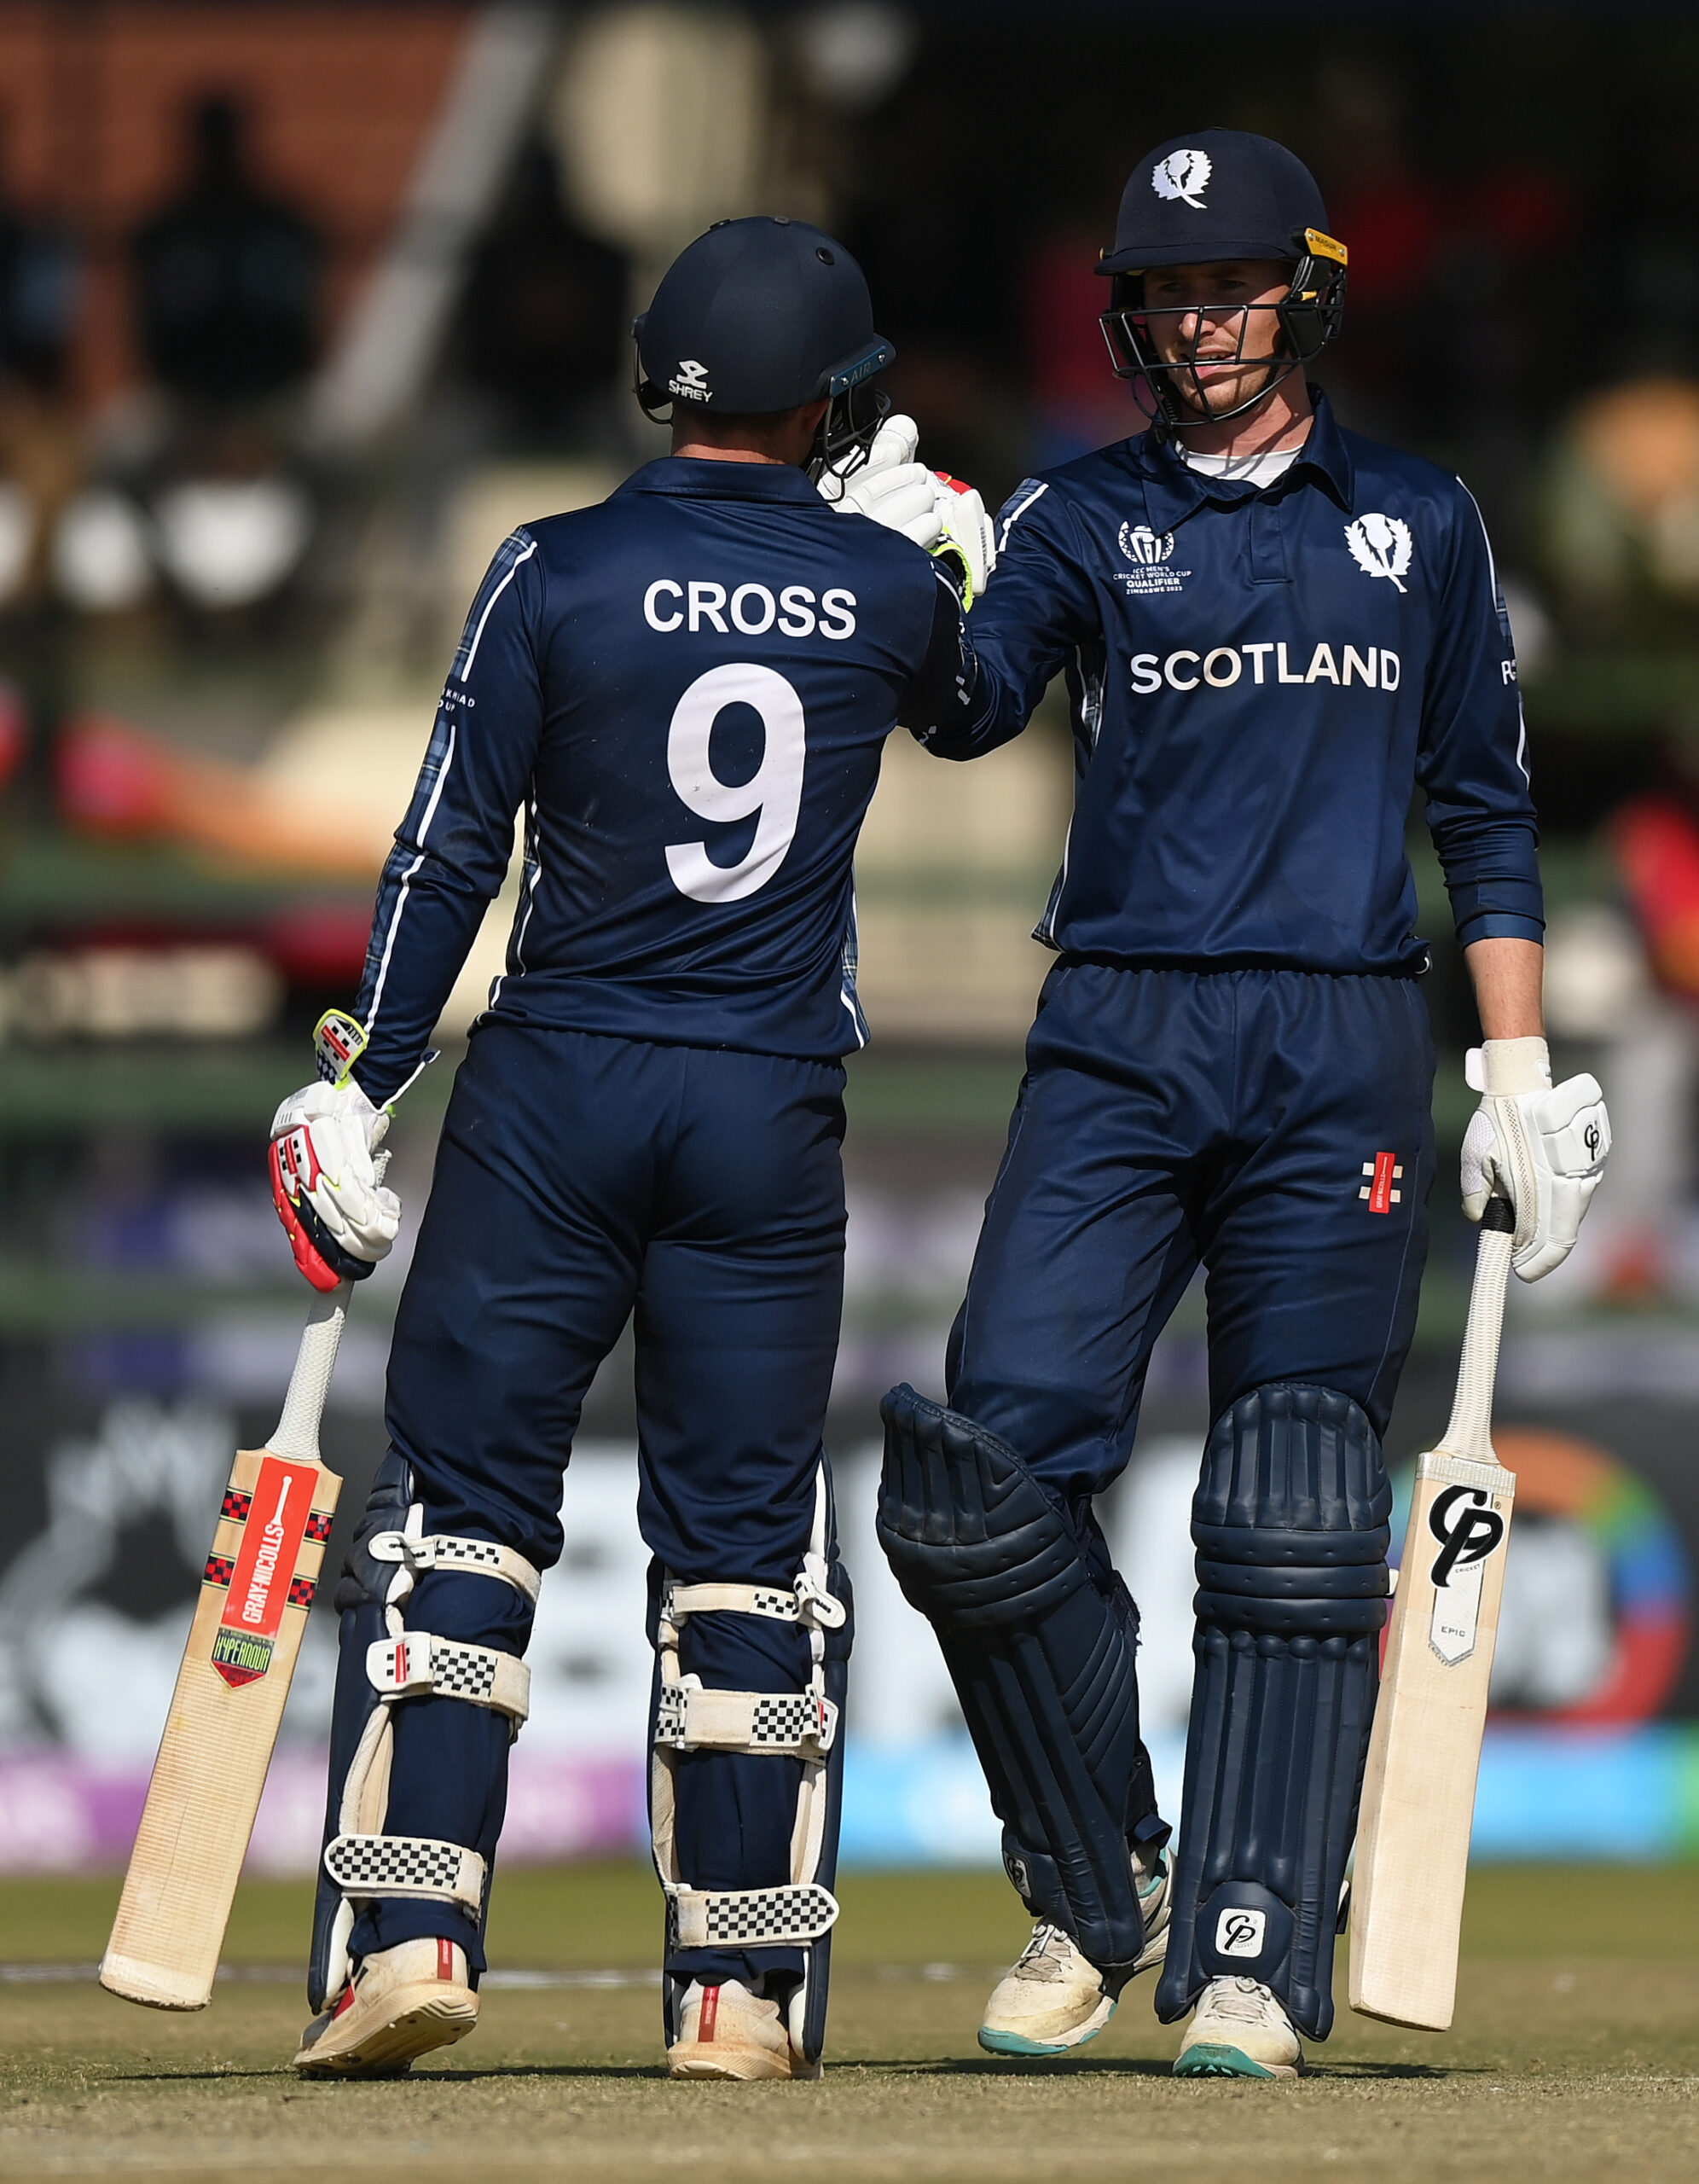 CLINICAL SCOTLAND END WEST INDIES WORLD CUP DREAM